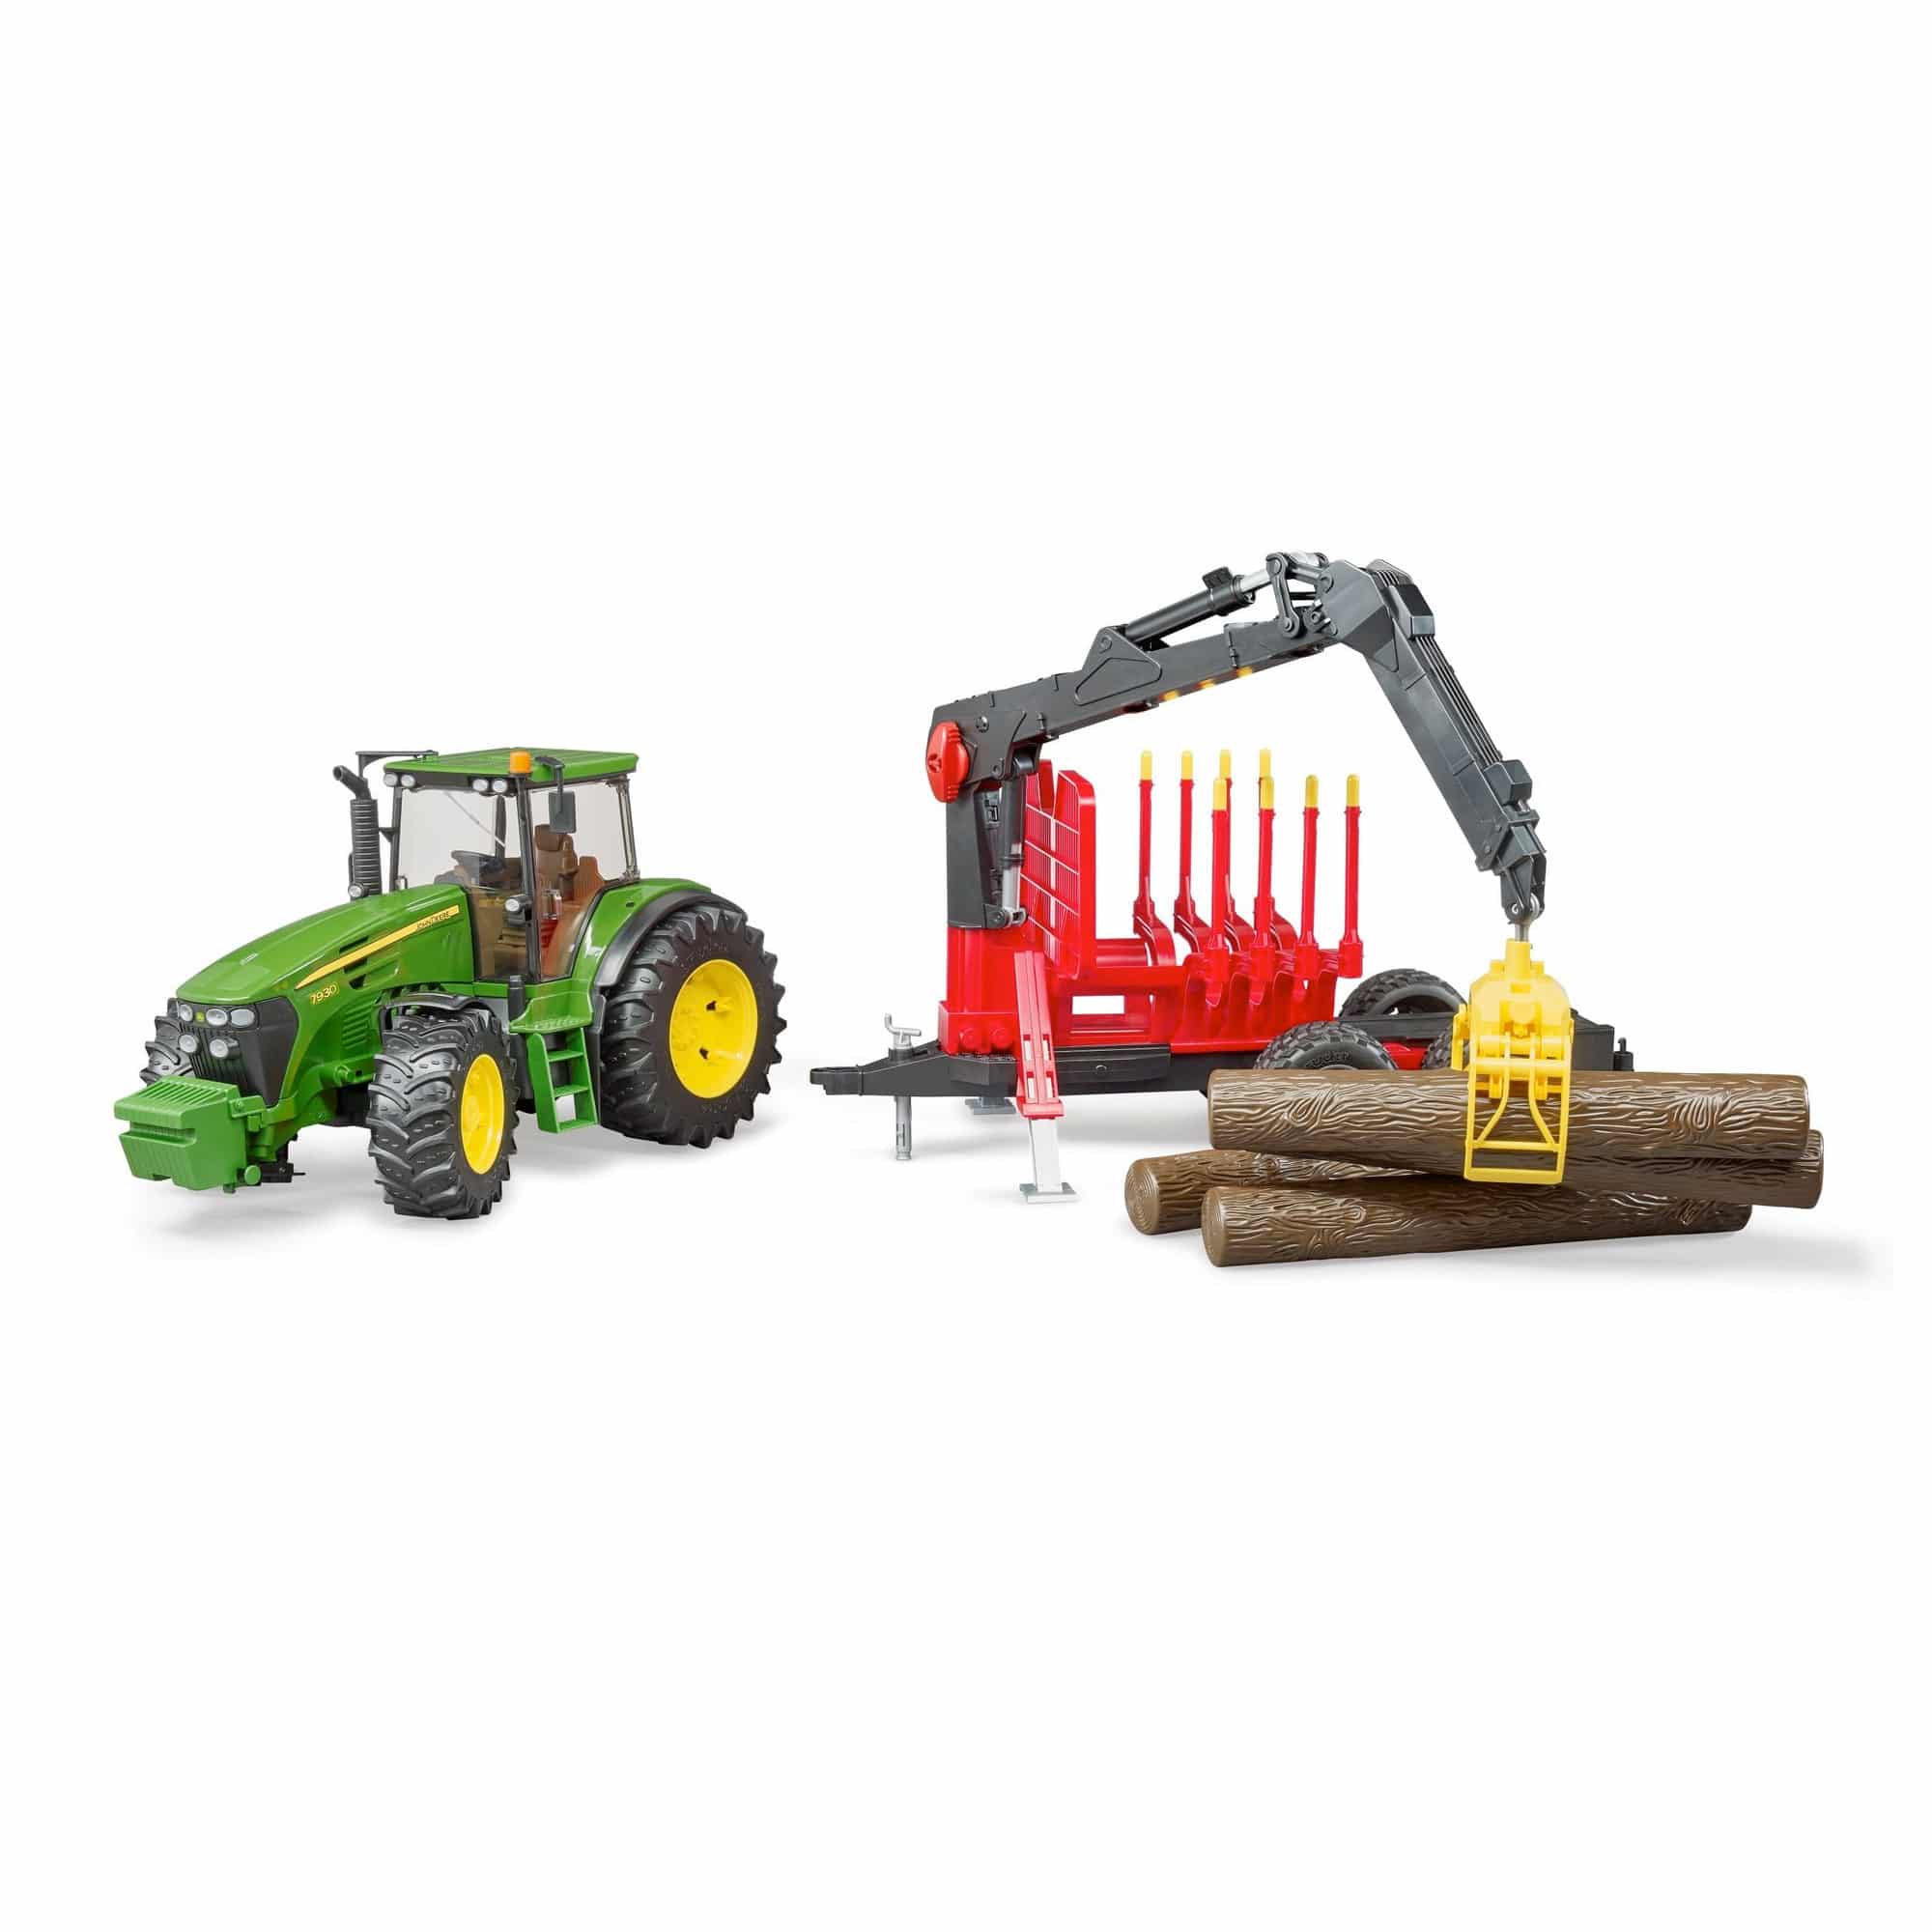 Bruder - John Deere 7930 Tractor with Forestry Trailer & Logs